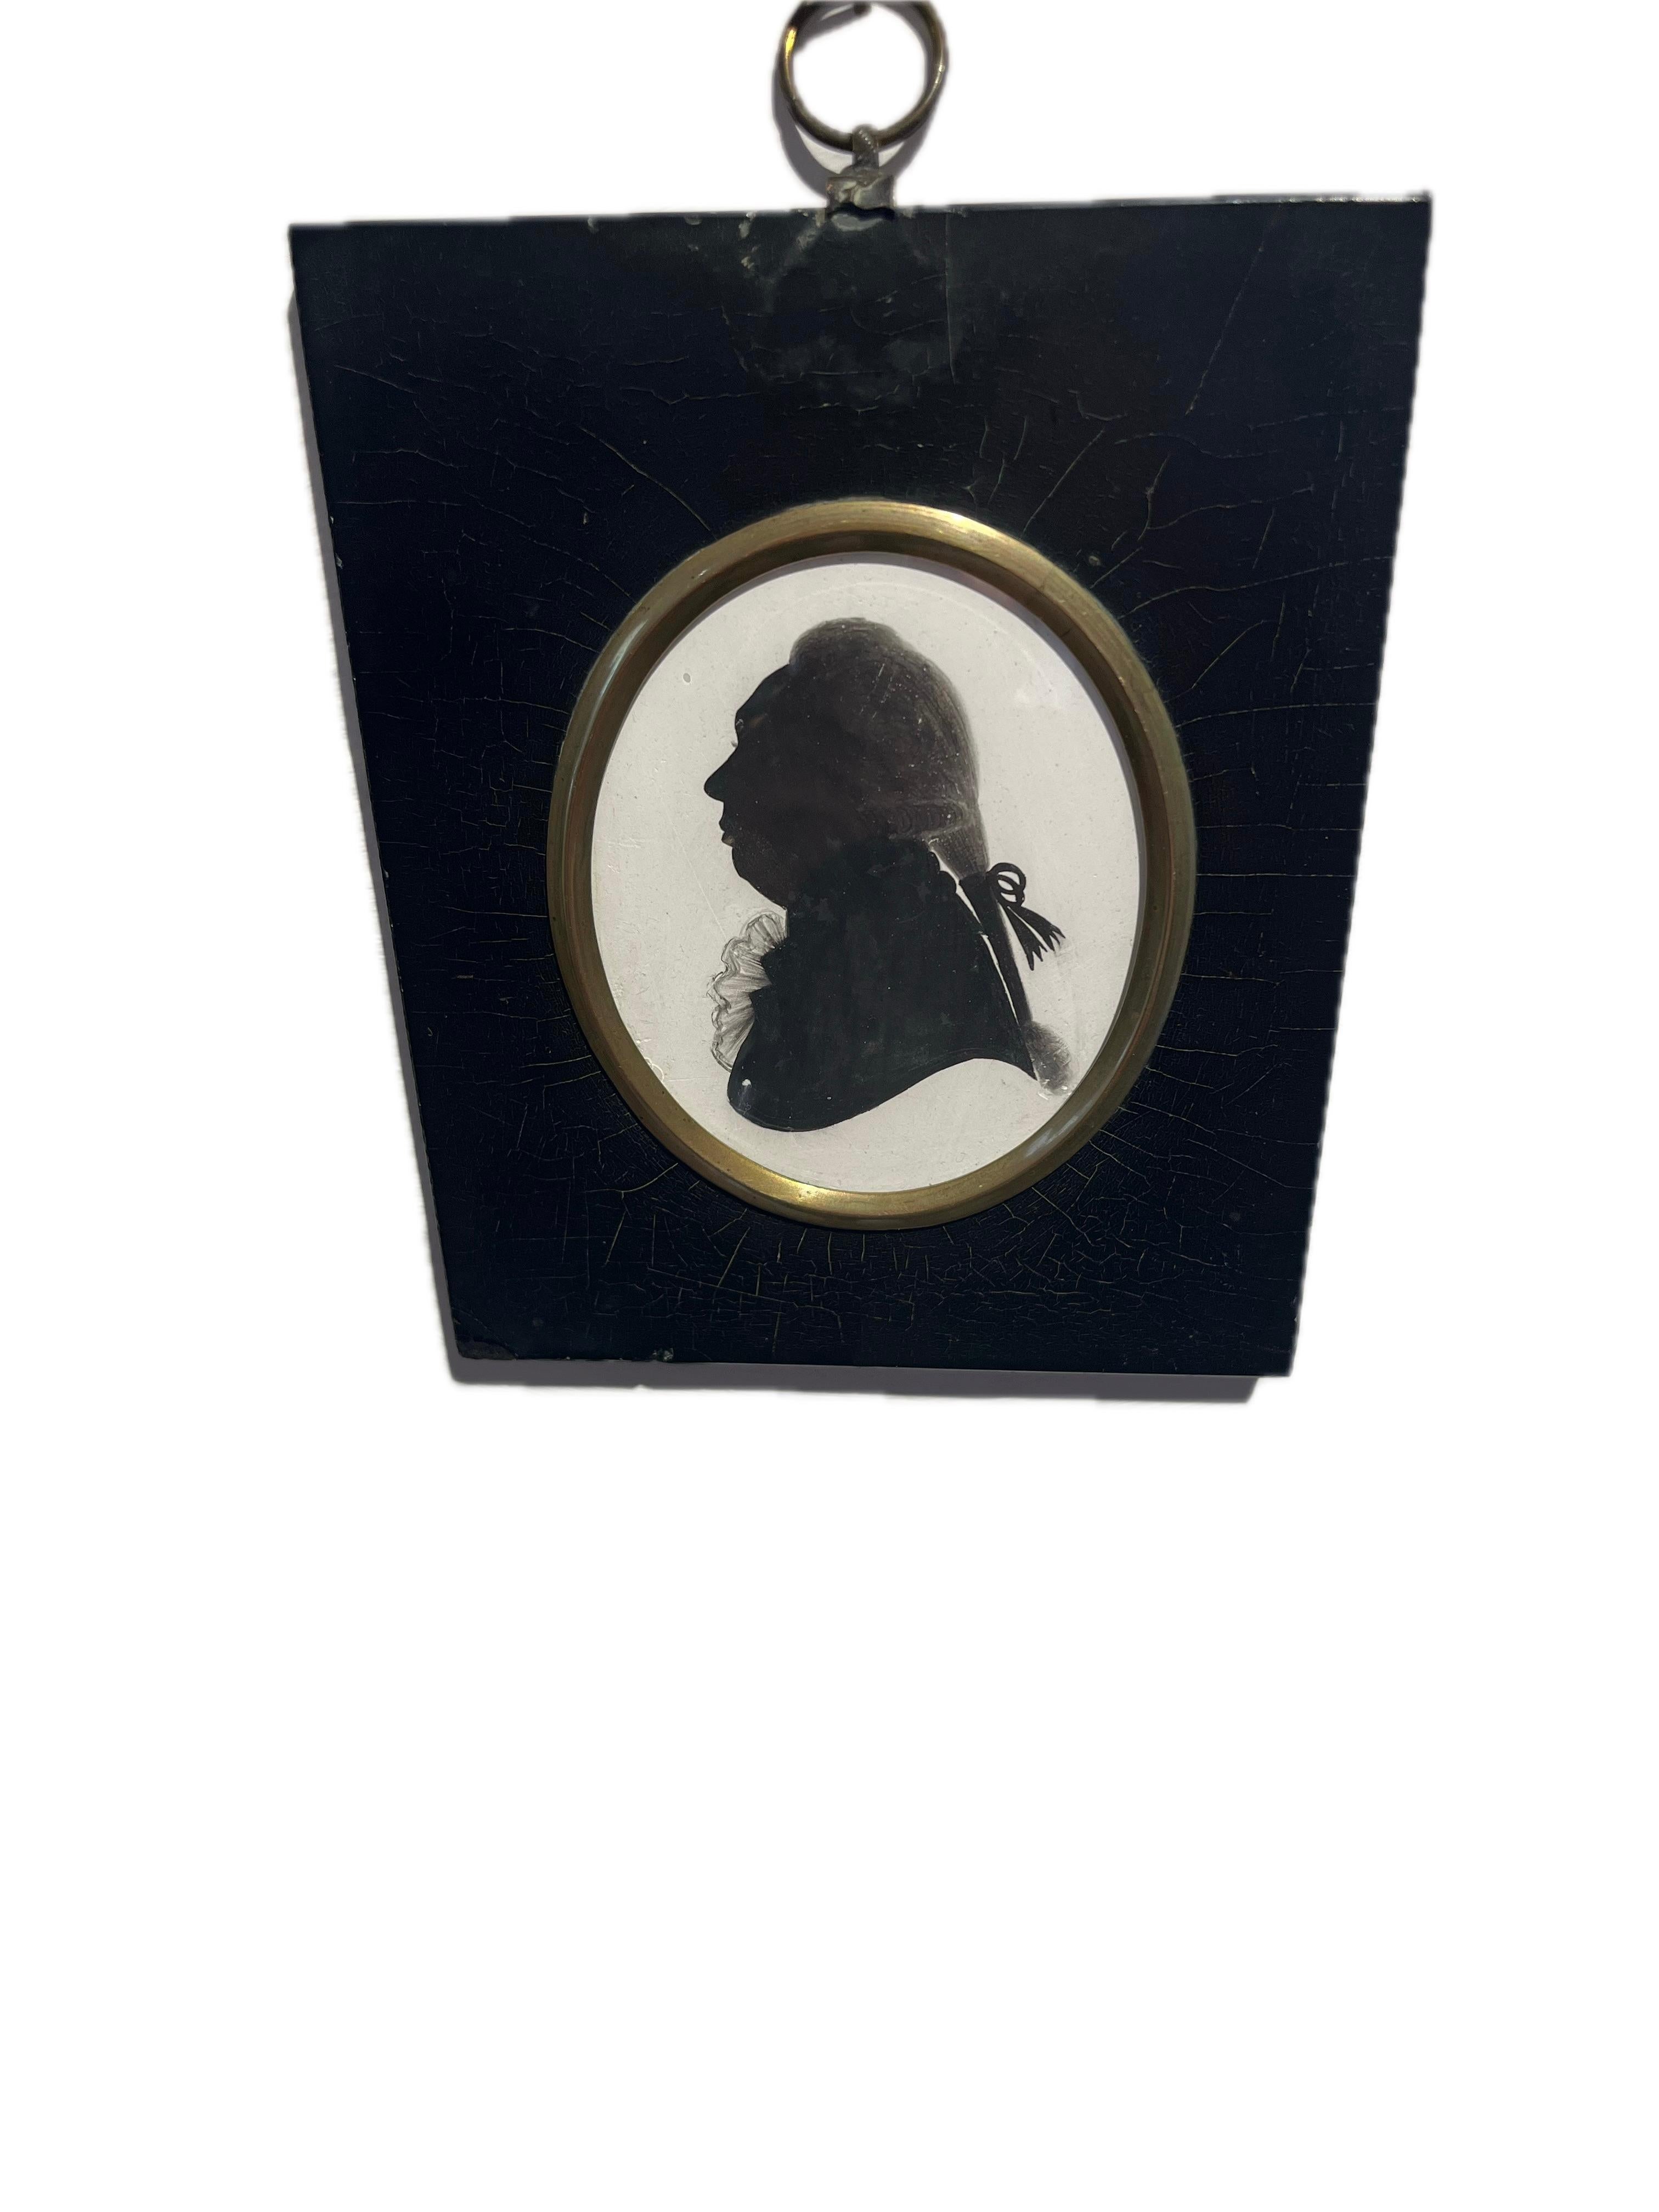 A very finely detailed silhouette in very good condition by one of the truly great silhouette artists of the Georgian period.

John Miers (1758-1821)
Portrait of a gentleman, profile to the left, wearing coat, frilled cravat, pigtail wig tied with a